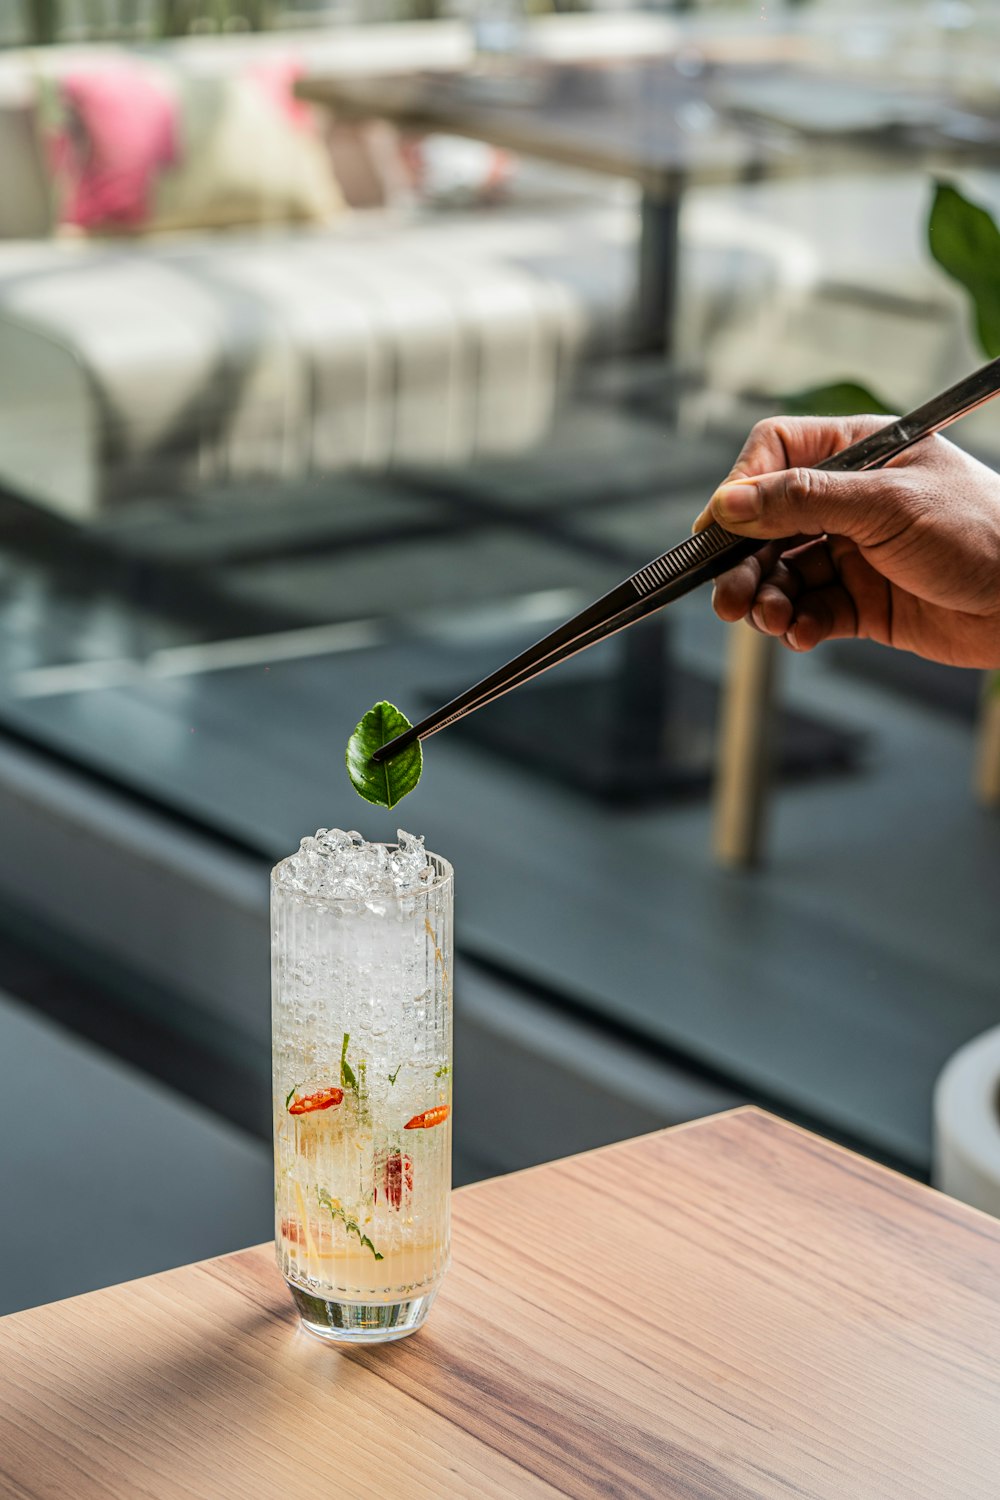 a person holding chopsticks above a tall glass filled with liquid